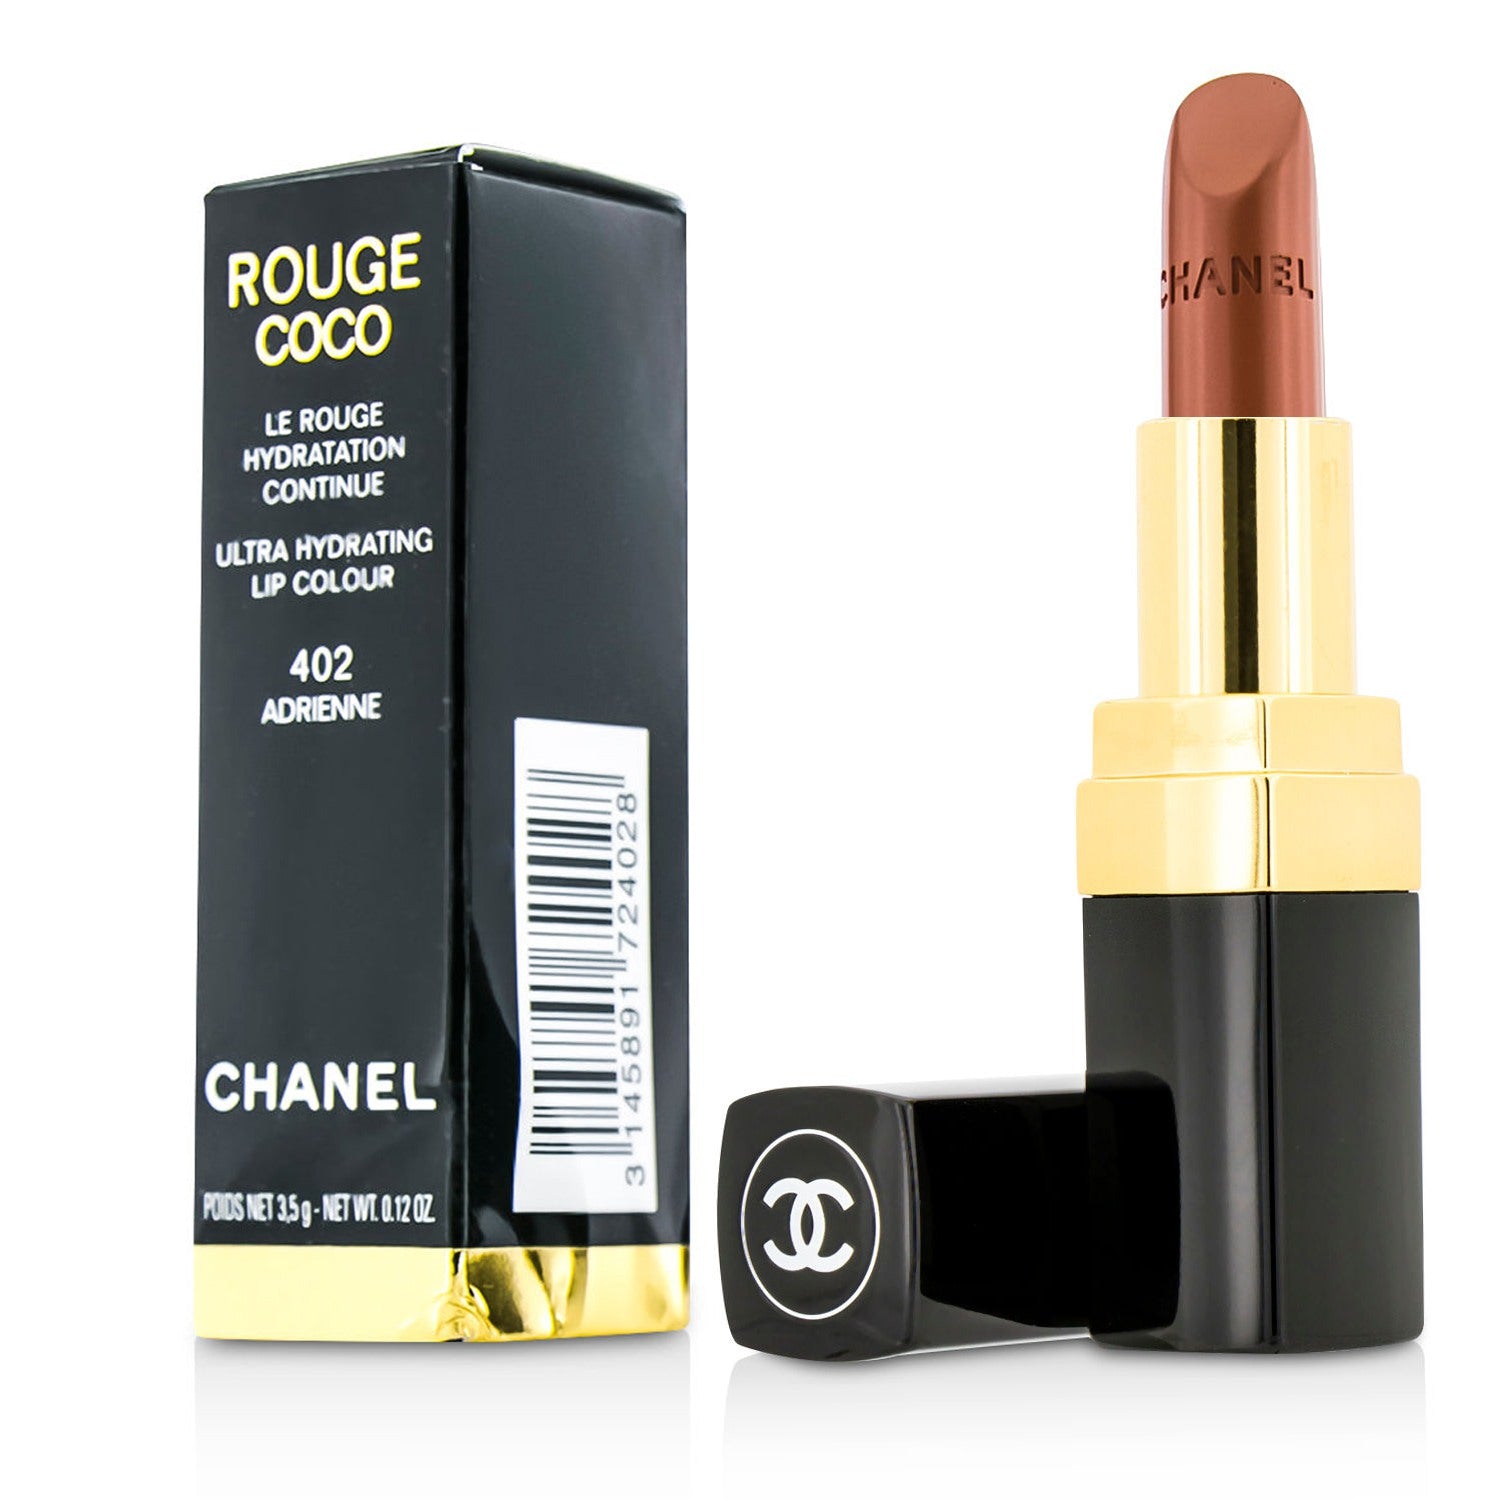 Chanel Rouge Coco Ultra Hydrating Lip Colour - 402 Adrienne